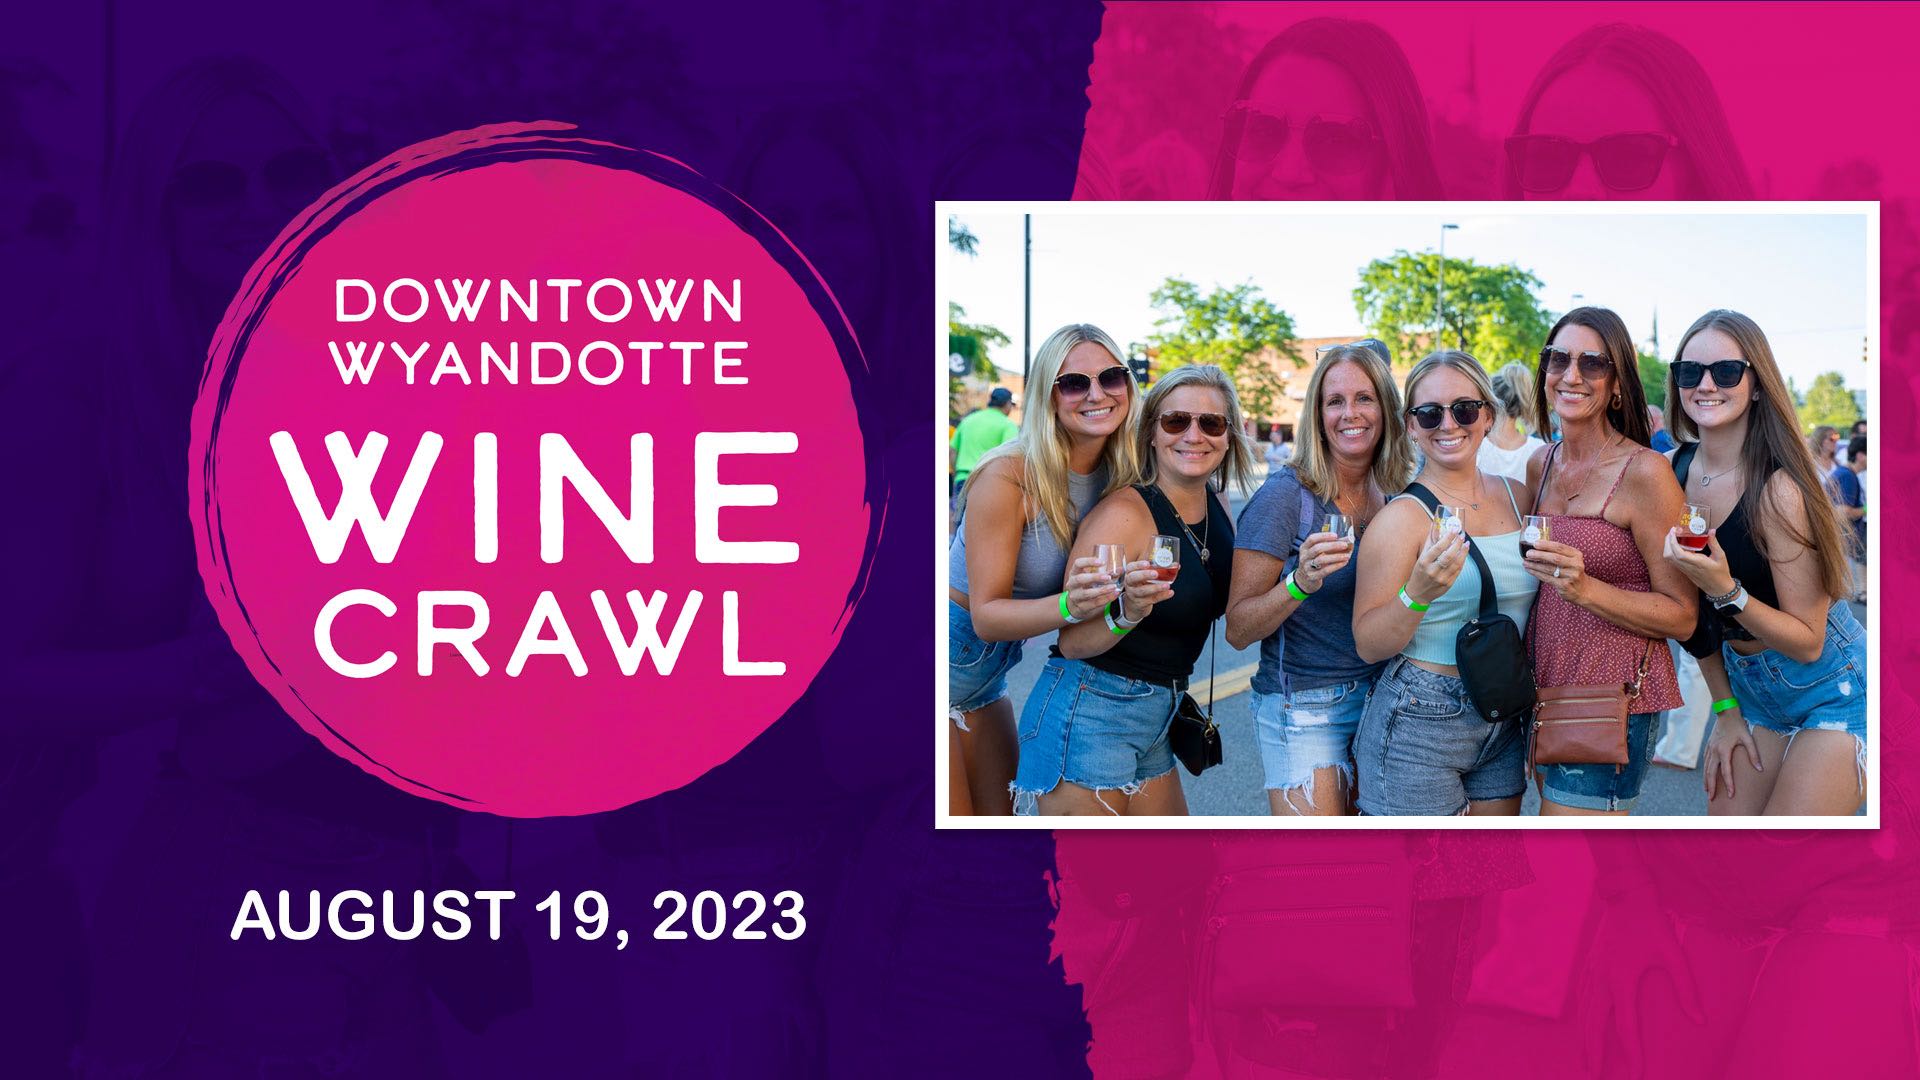 Downtown Wyandotte Wine Crawl; August 19, 2023; featuring image of group of young ladies posing with wine glasses